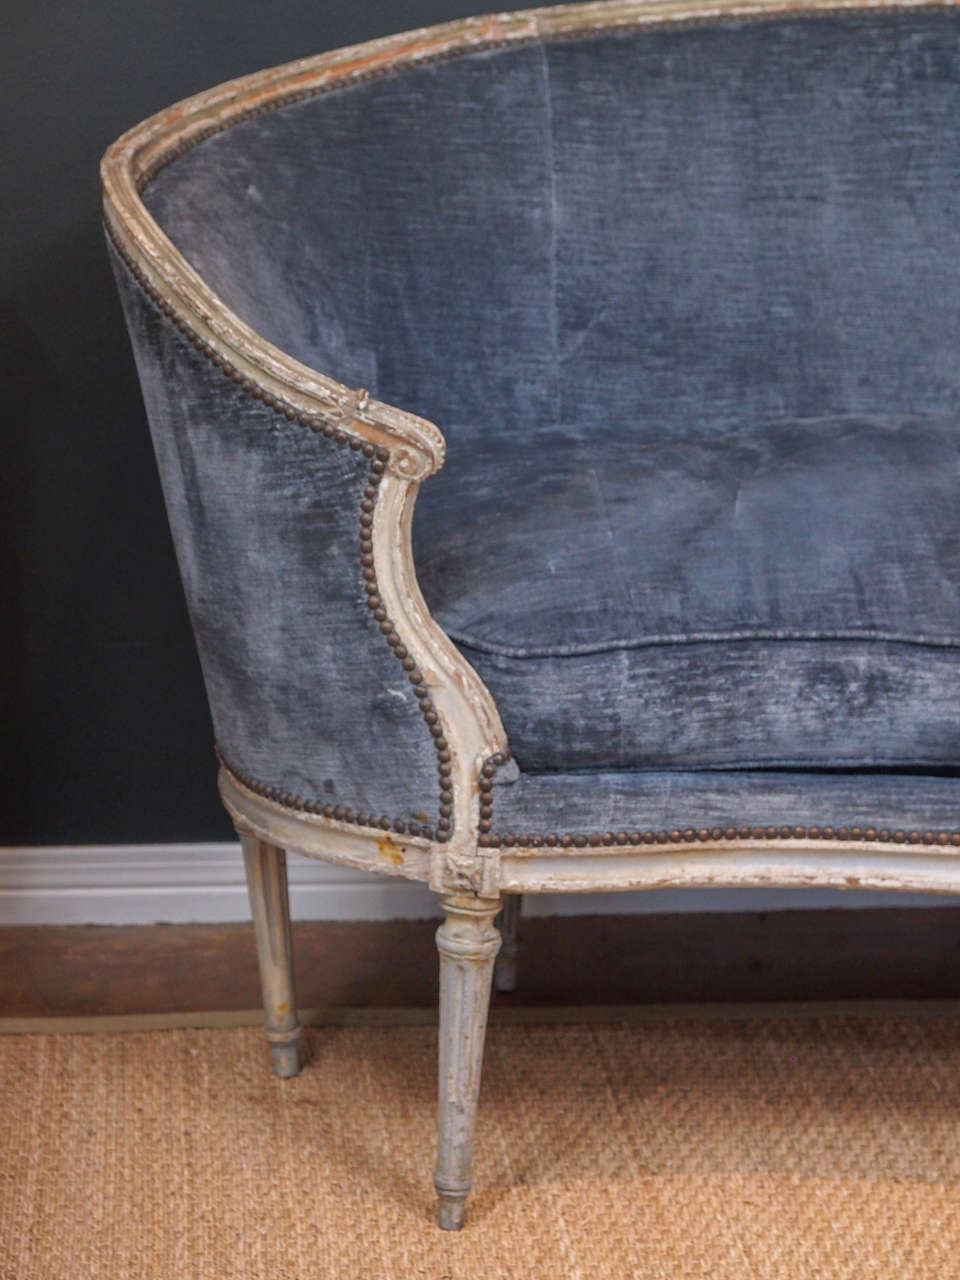 19th century french sofa with surround arms, whitewashed and carved frame with central bow motif and fluted supporting legs.  Upholstery is an old, beautiful blue grey and is framed with brass studs.